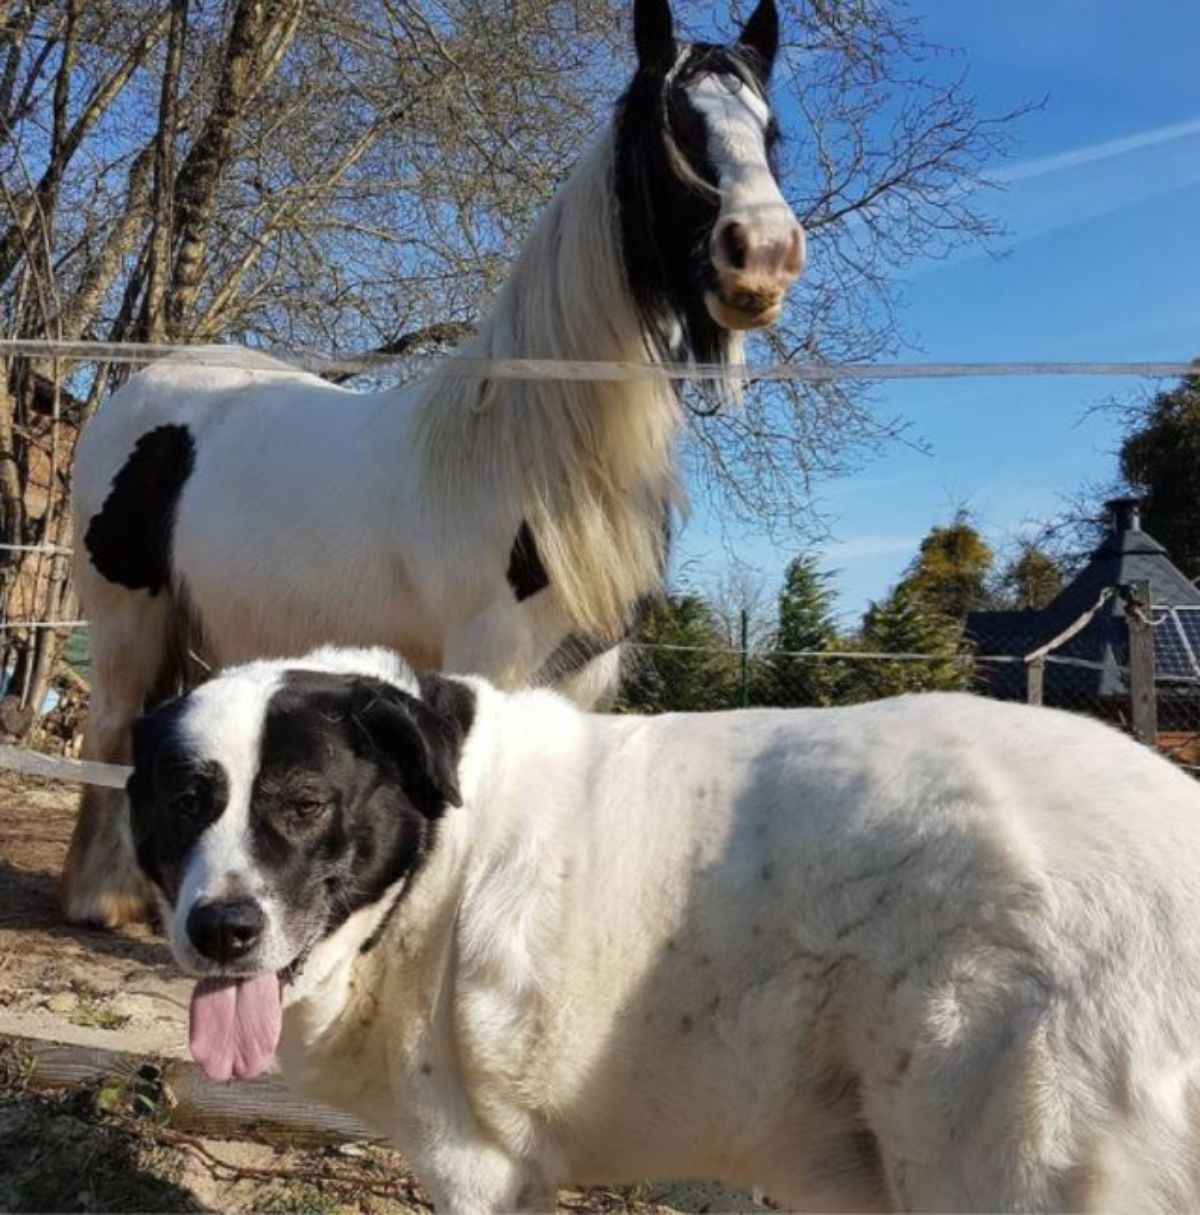 black and white dog with a black and white horse behind a fence